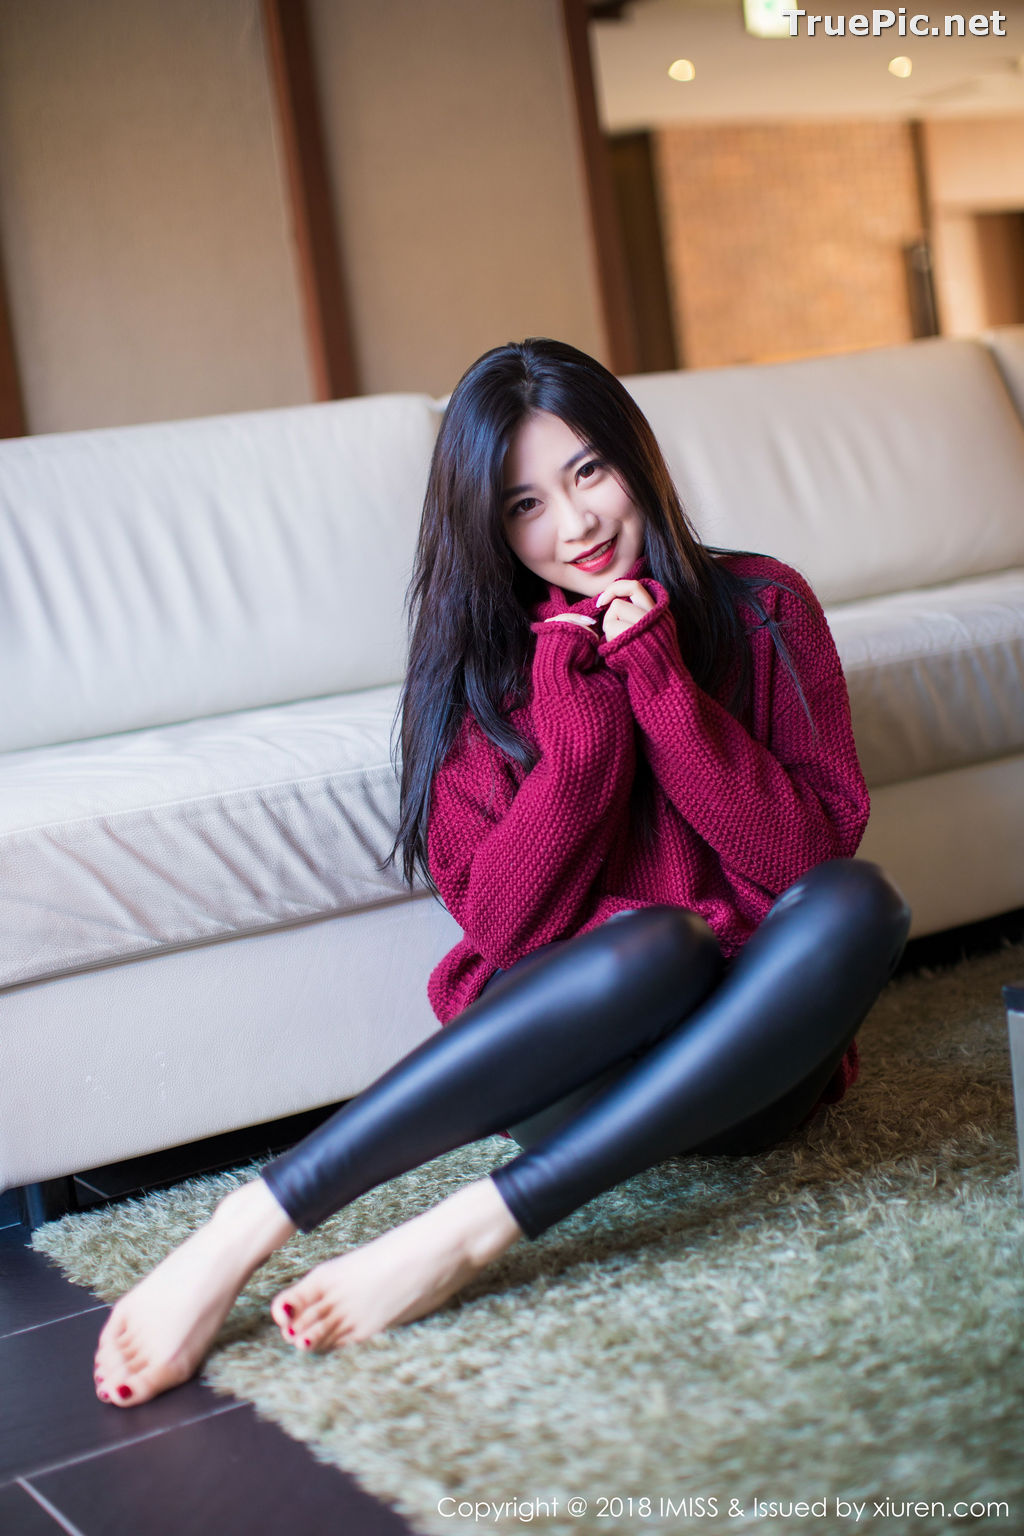 Image IMISS Vol.239 - Chinese Model - Sabrina (Xu Nuo 许诺) - Office Girl - TruePic.net - Picture-43